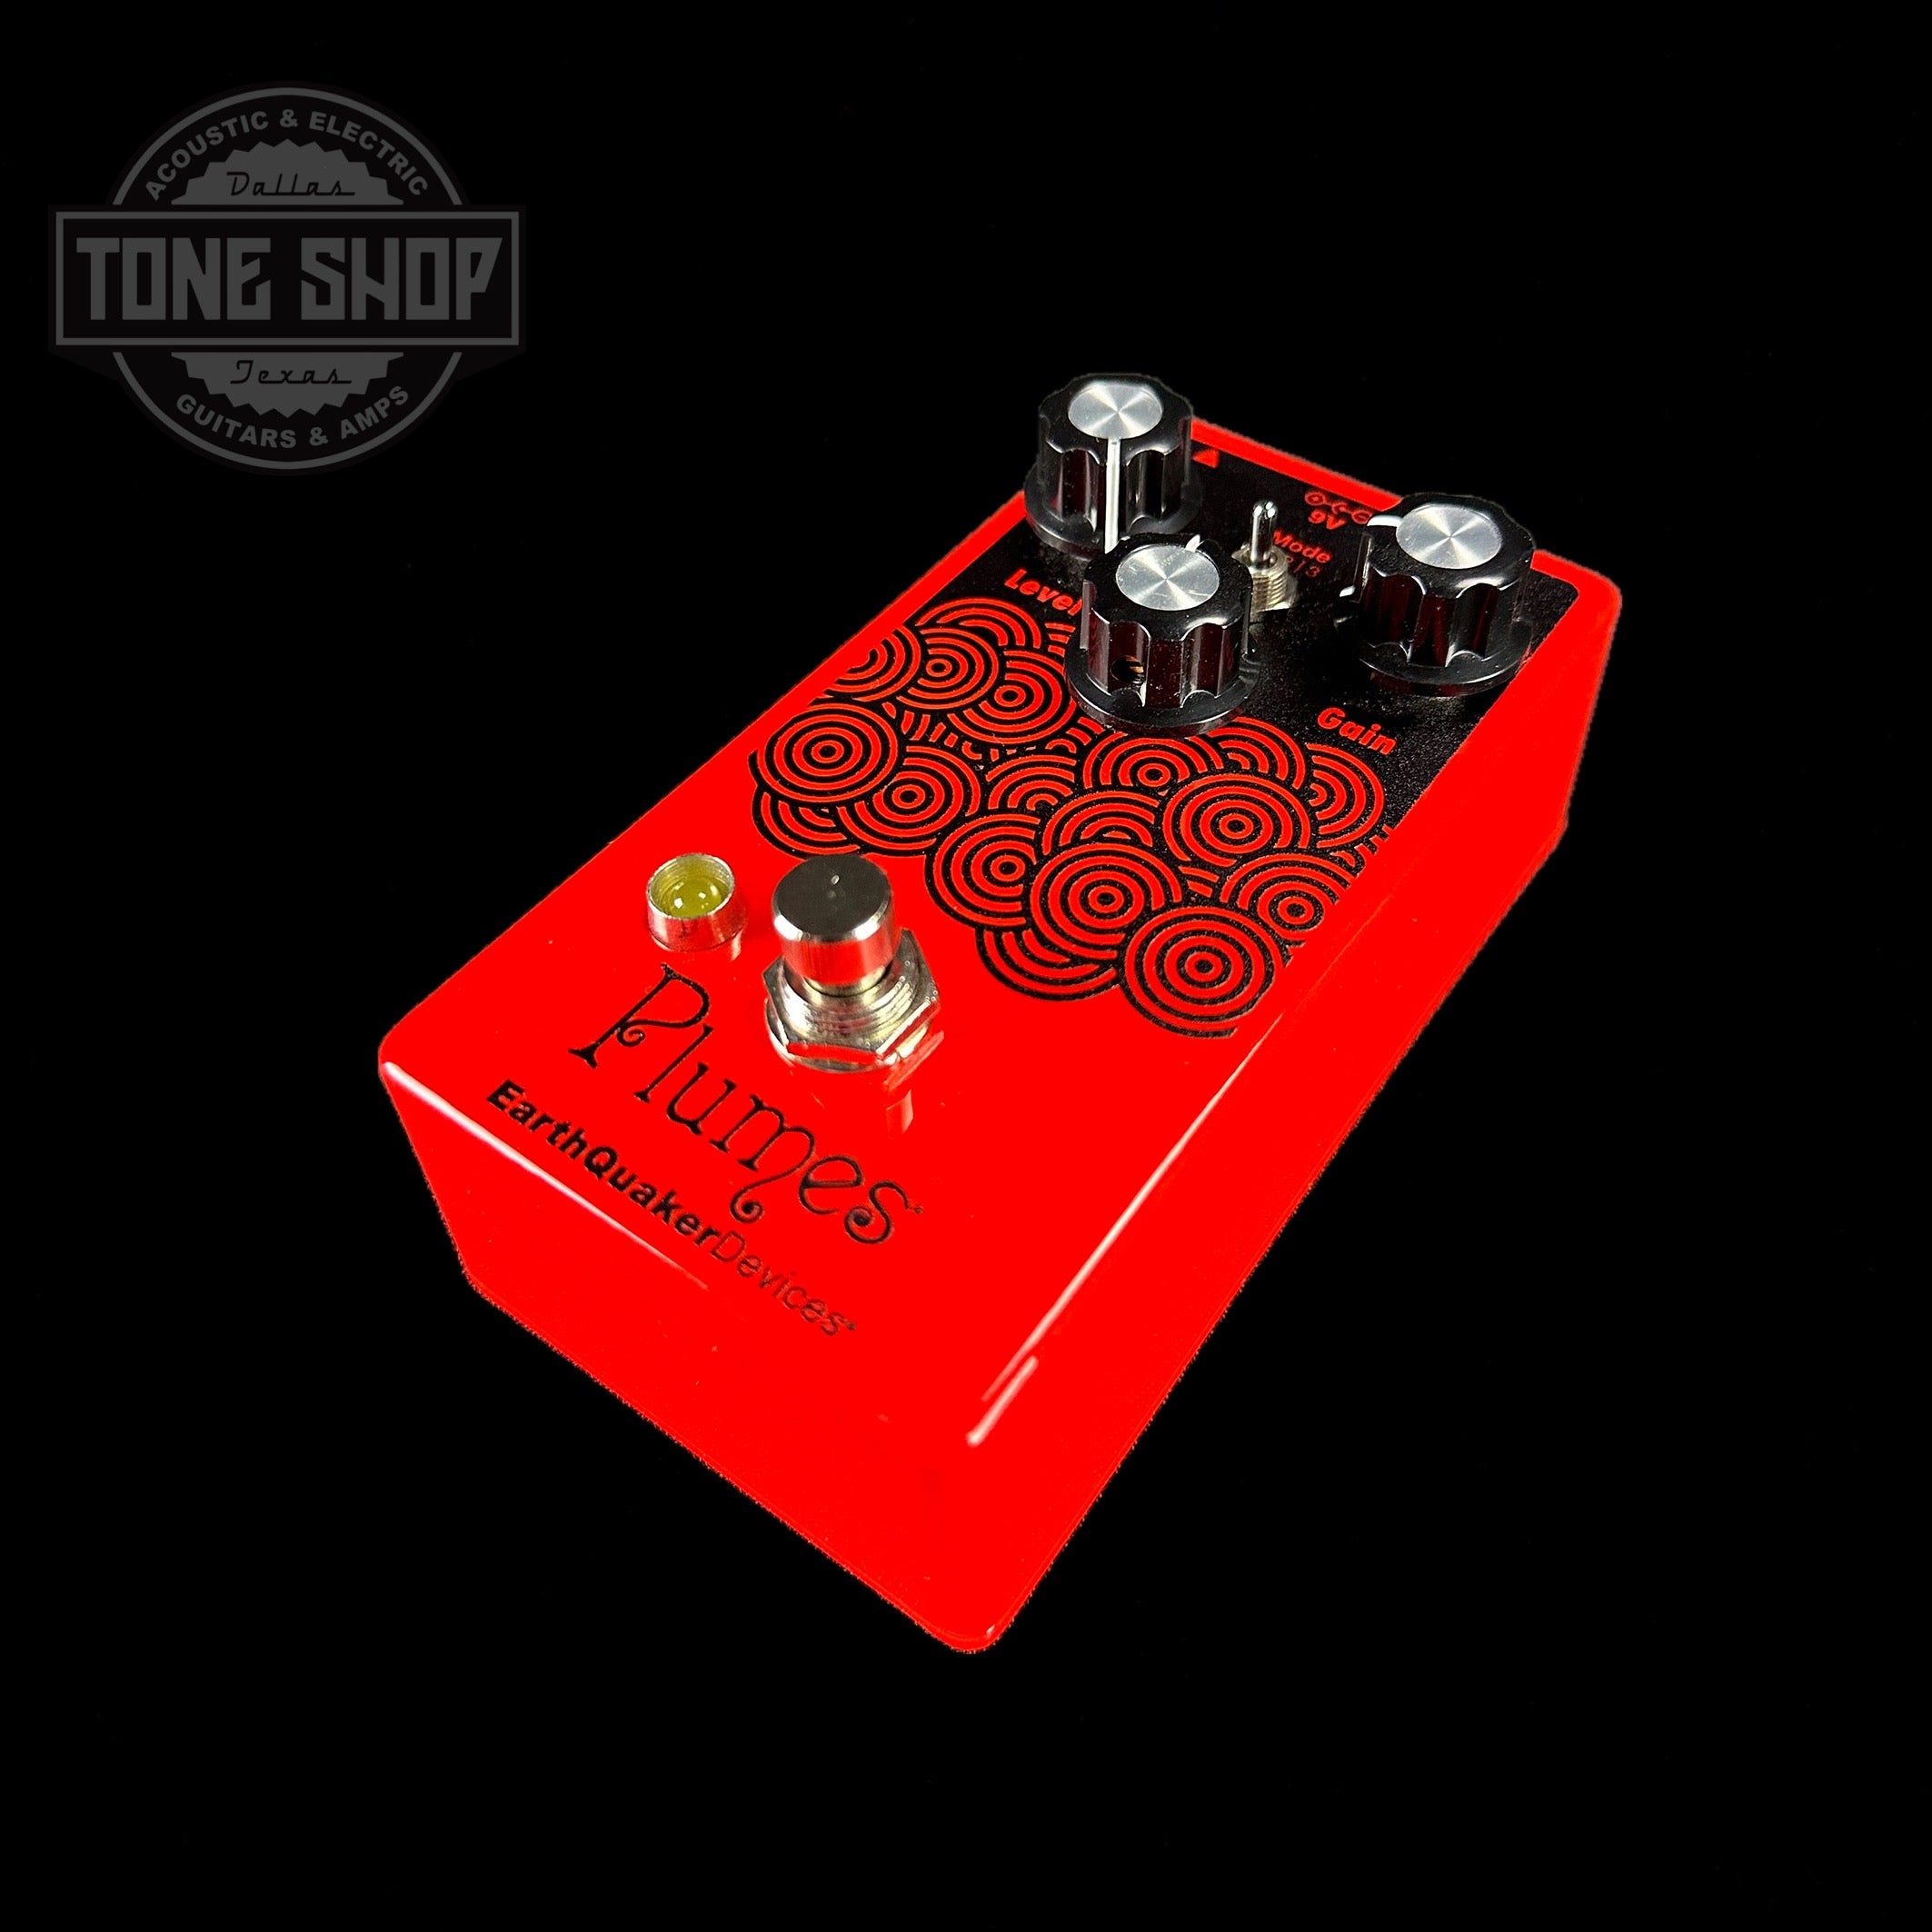 EarthQuaker Devices Plumes Tone Shop Custom Candy Apple Red